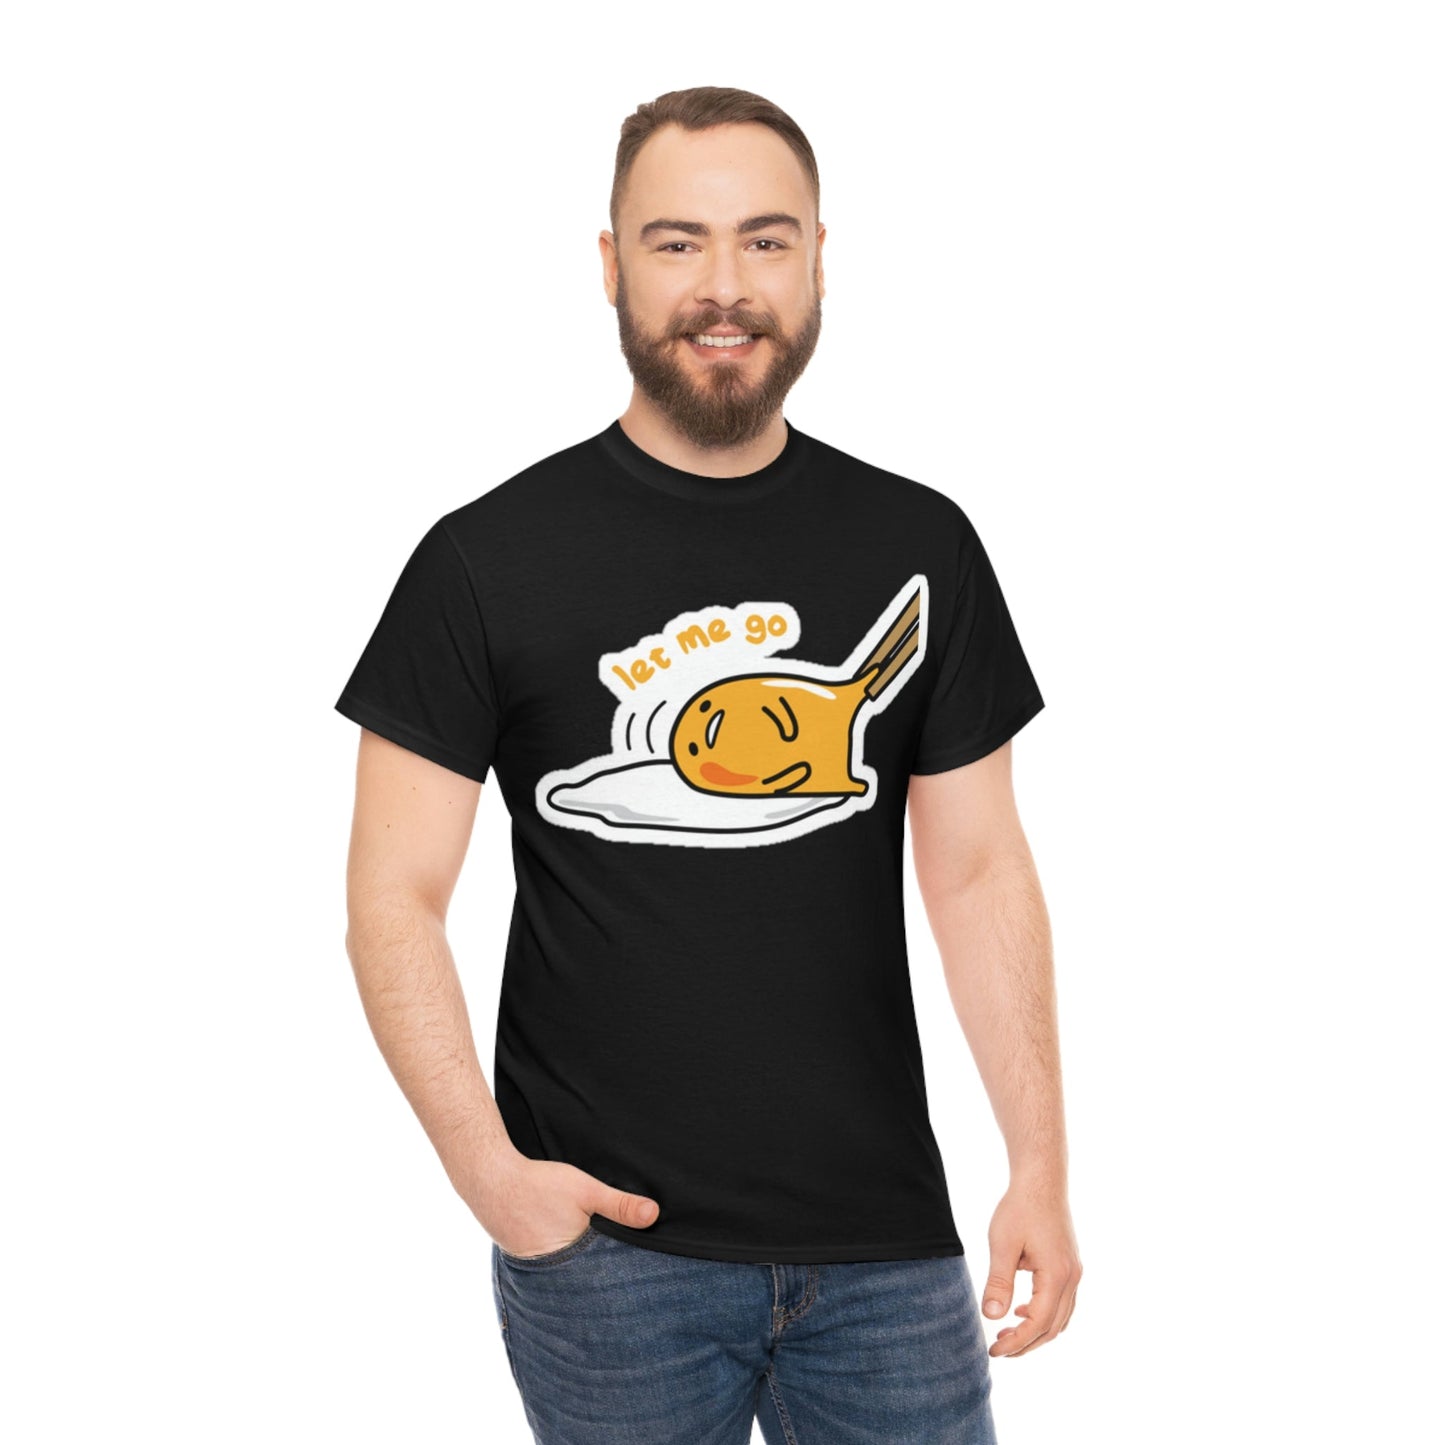 Gudetama T-Shirt: The Perfect Gift for Fans of the Adorable Egg Cartoon - RetroTeeShop